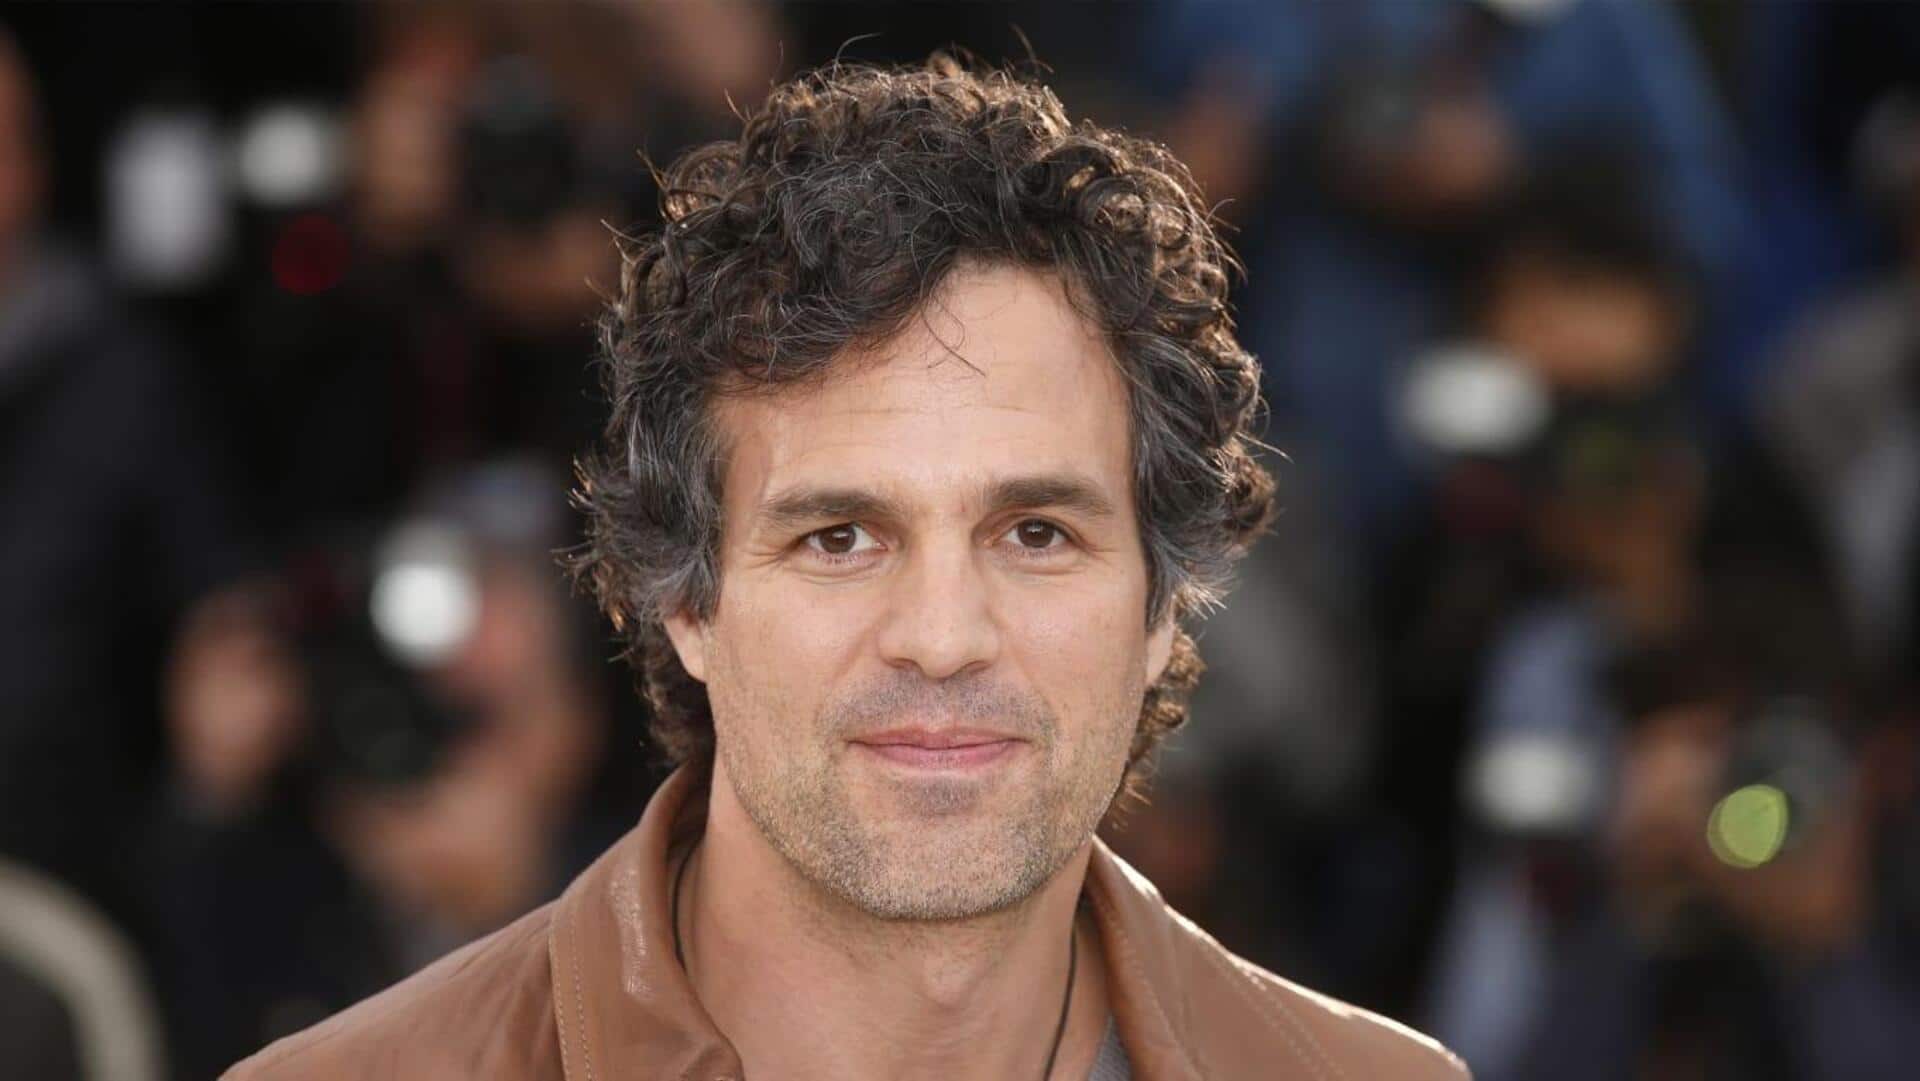 'The Avengers' to 'Foxcatcher': Mark Ruffalo's best performances